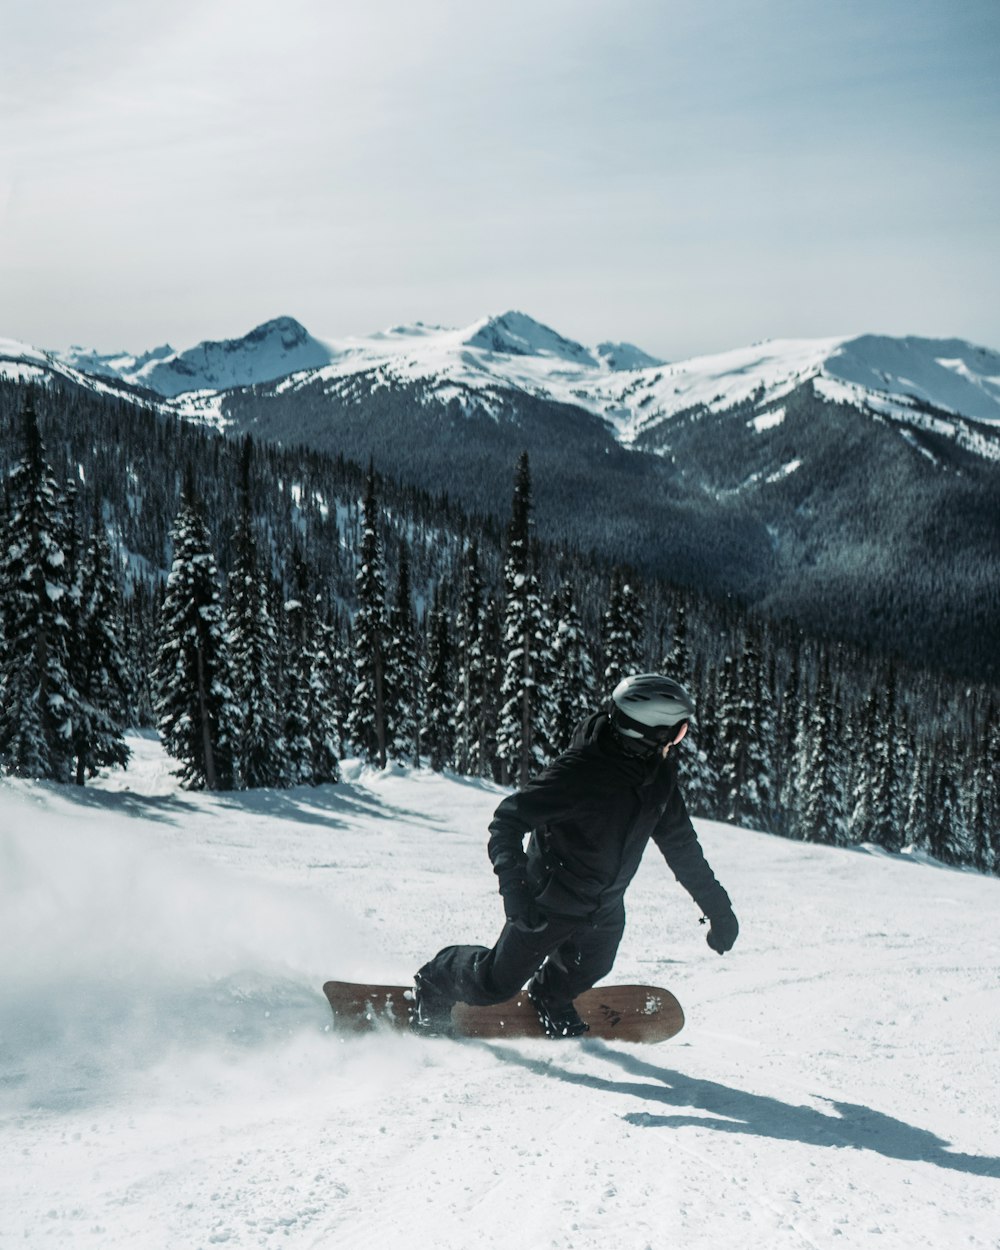 rainfall At dawn easy to handle 450+ Snowboarding Pictures [HQ] | Download Free Images on Unsplash